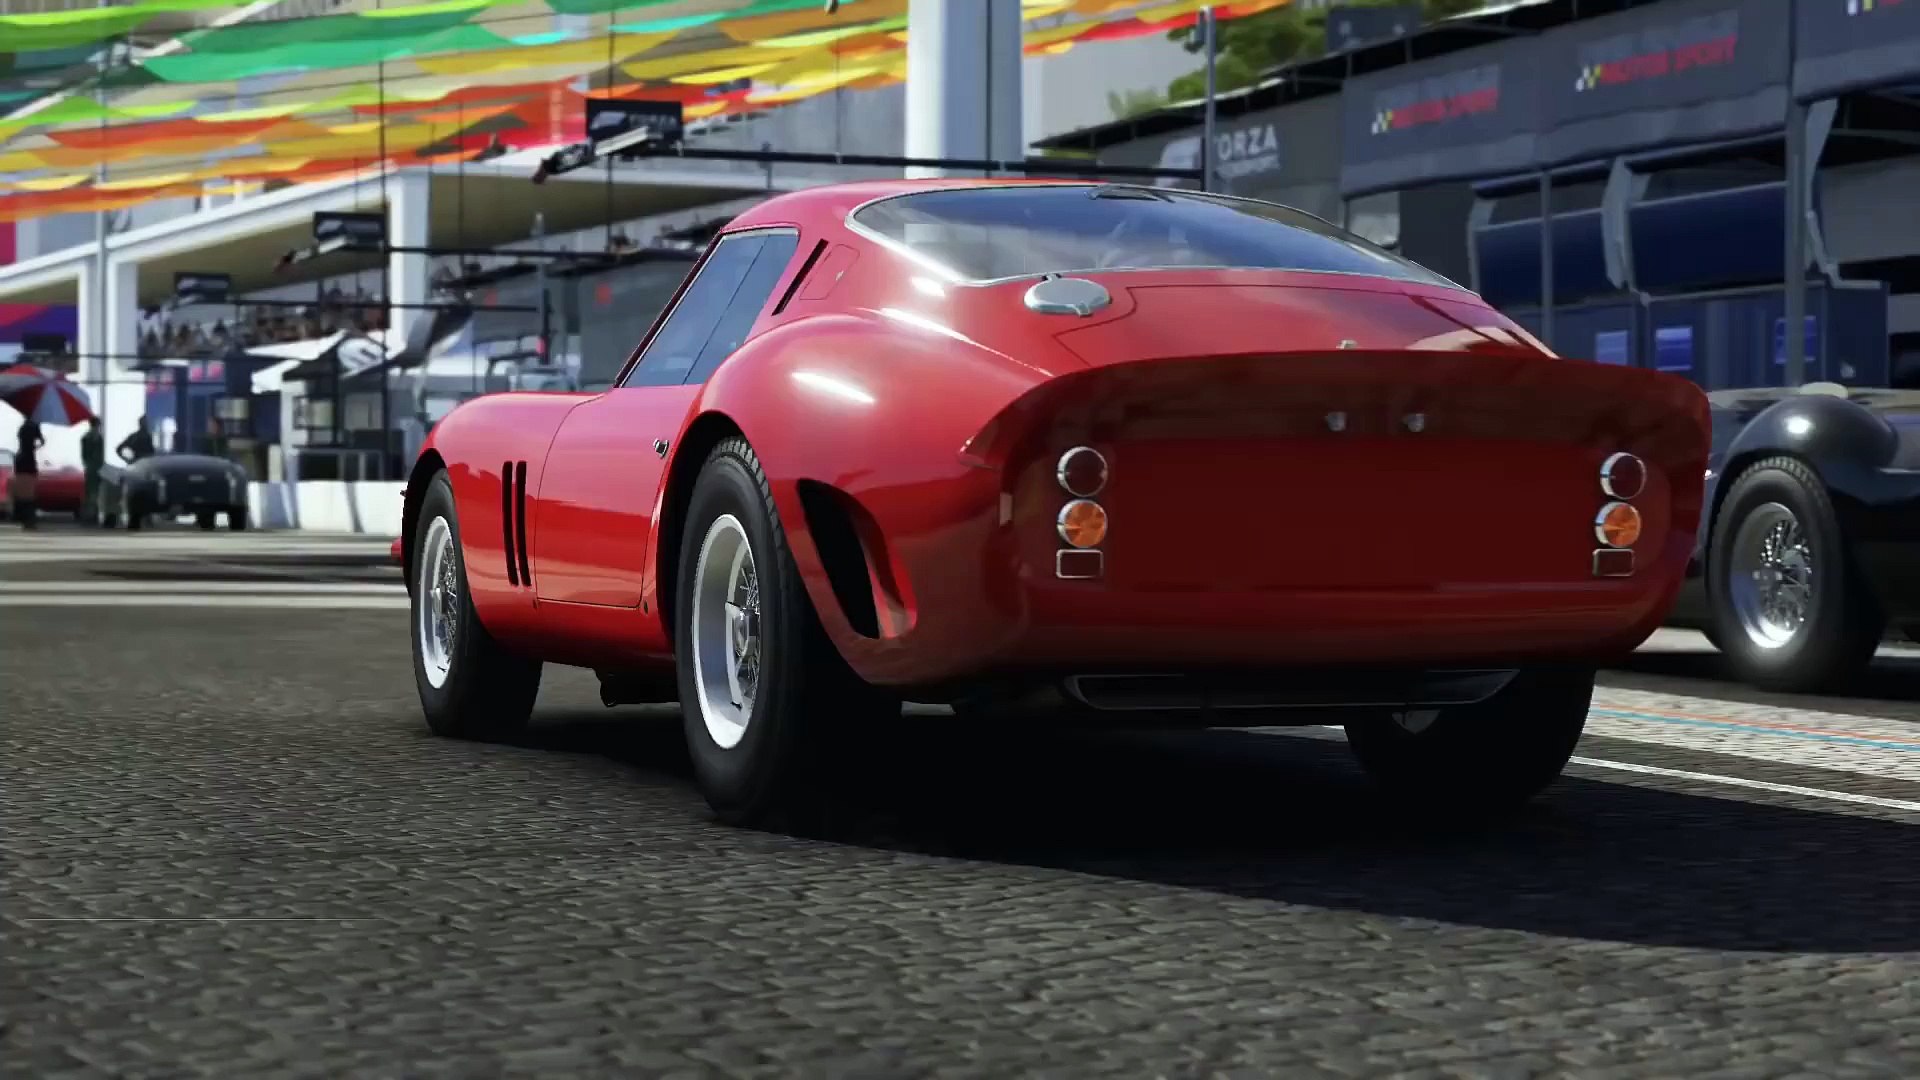 Forza Motorsport 6 Gameplay Impressions With Gameplay Footage - video  Dailymotion